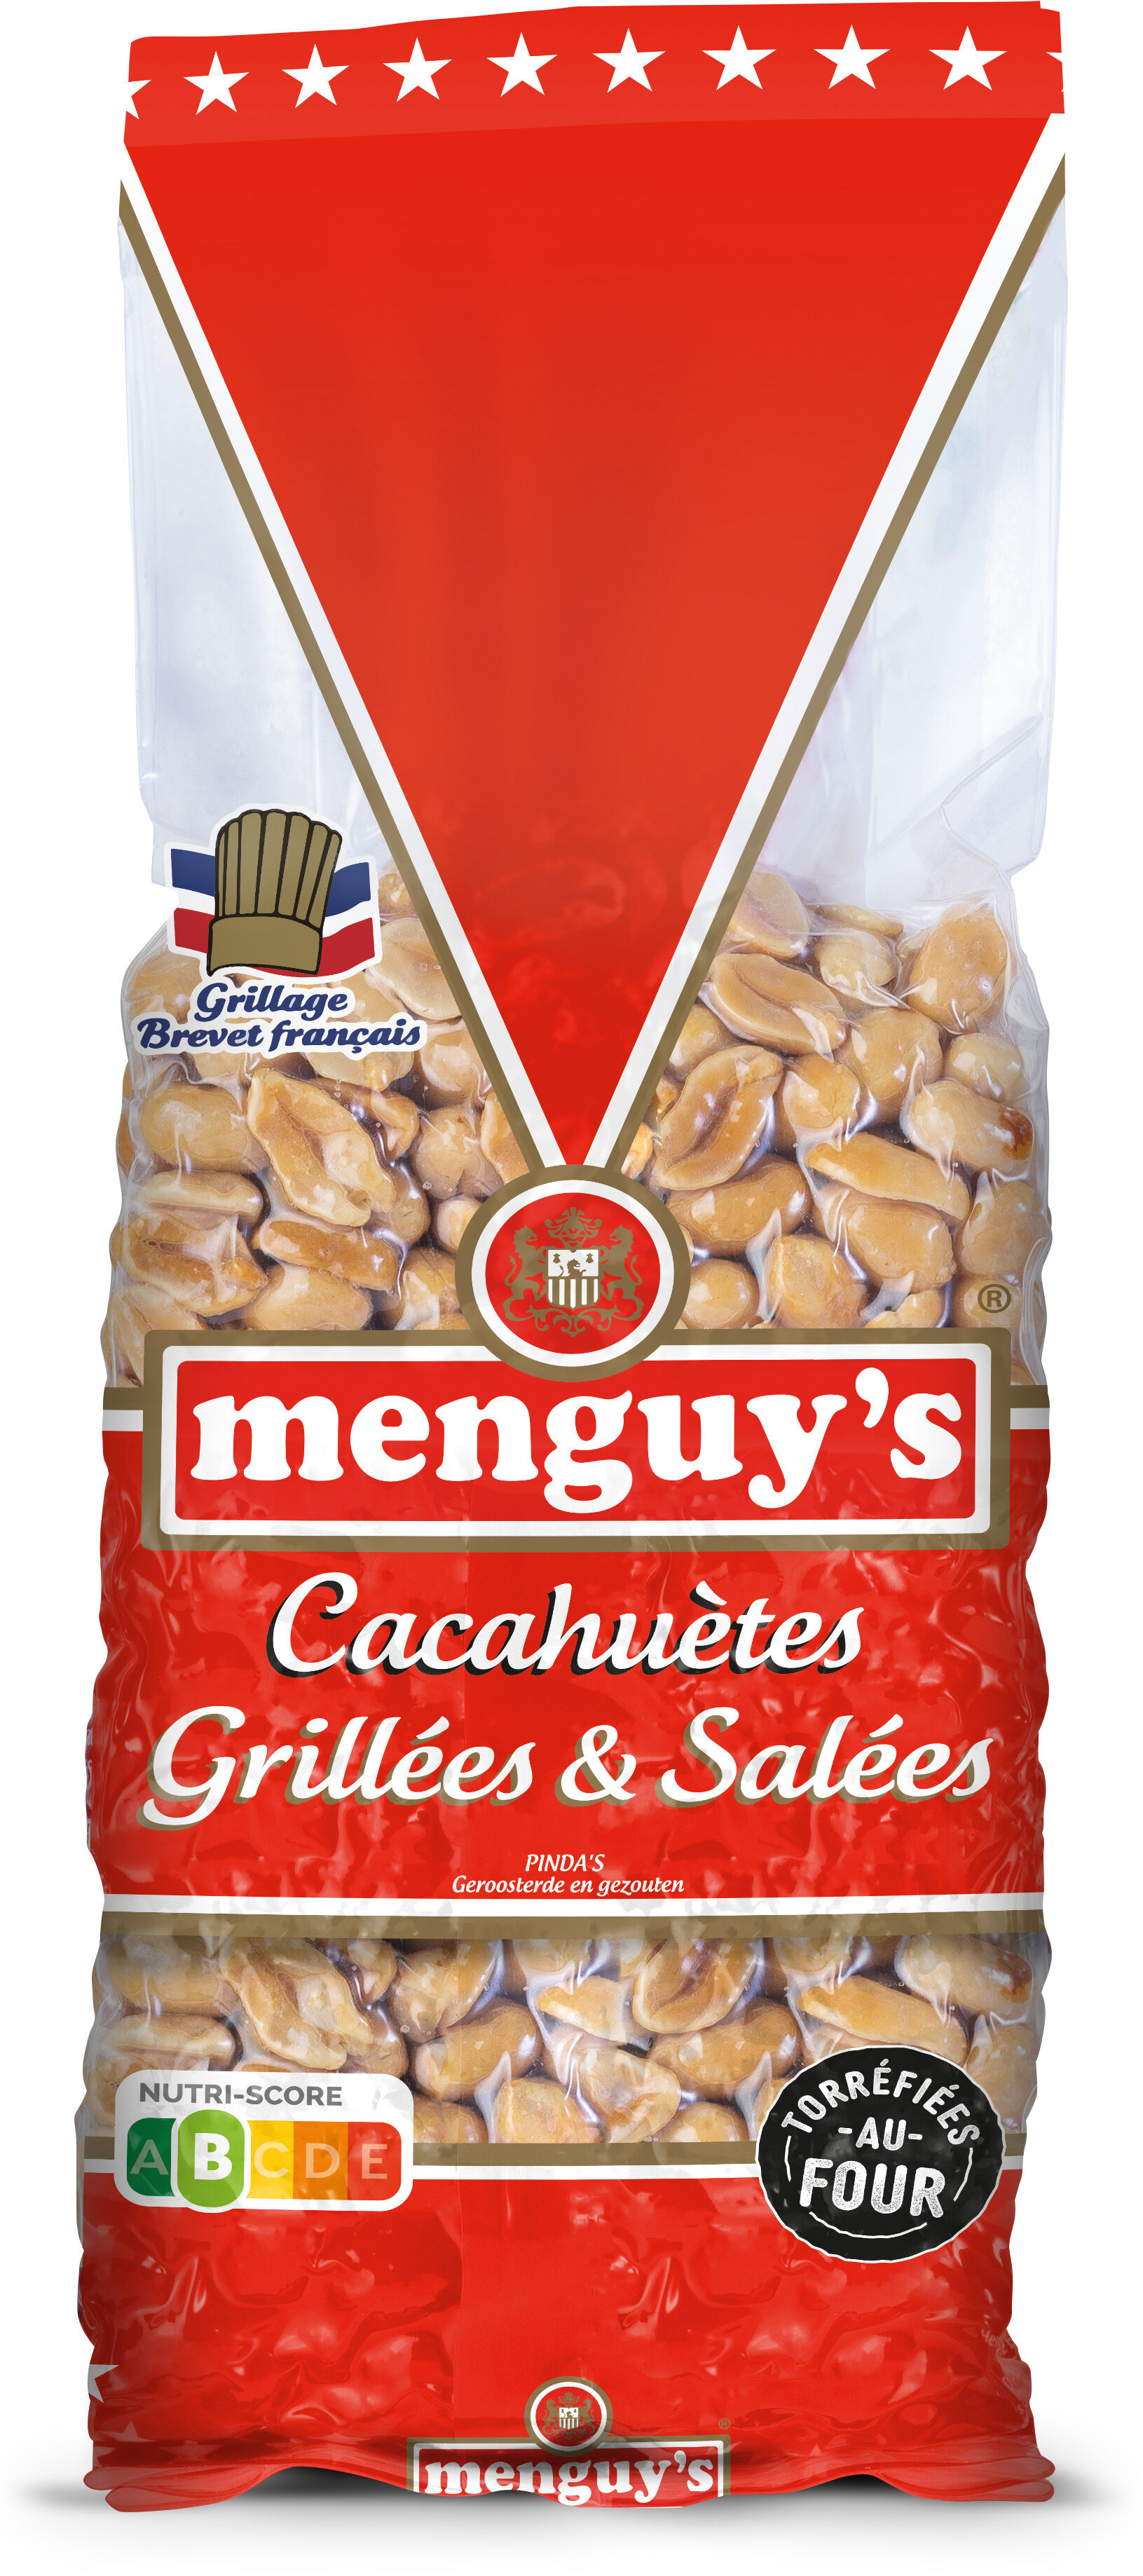 Menguy's cacahuetes grillees salees 410 g - Product - fr